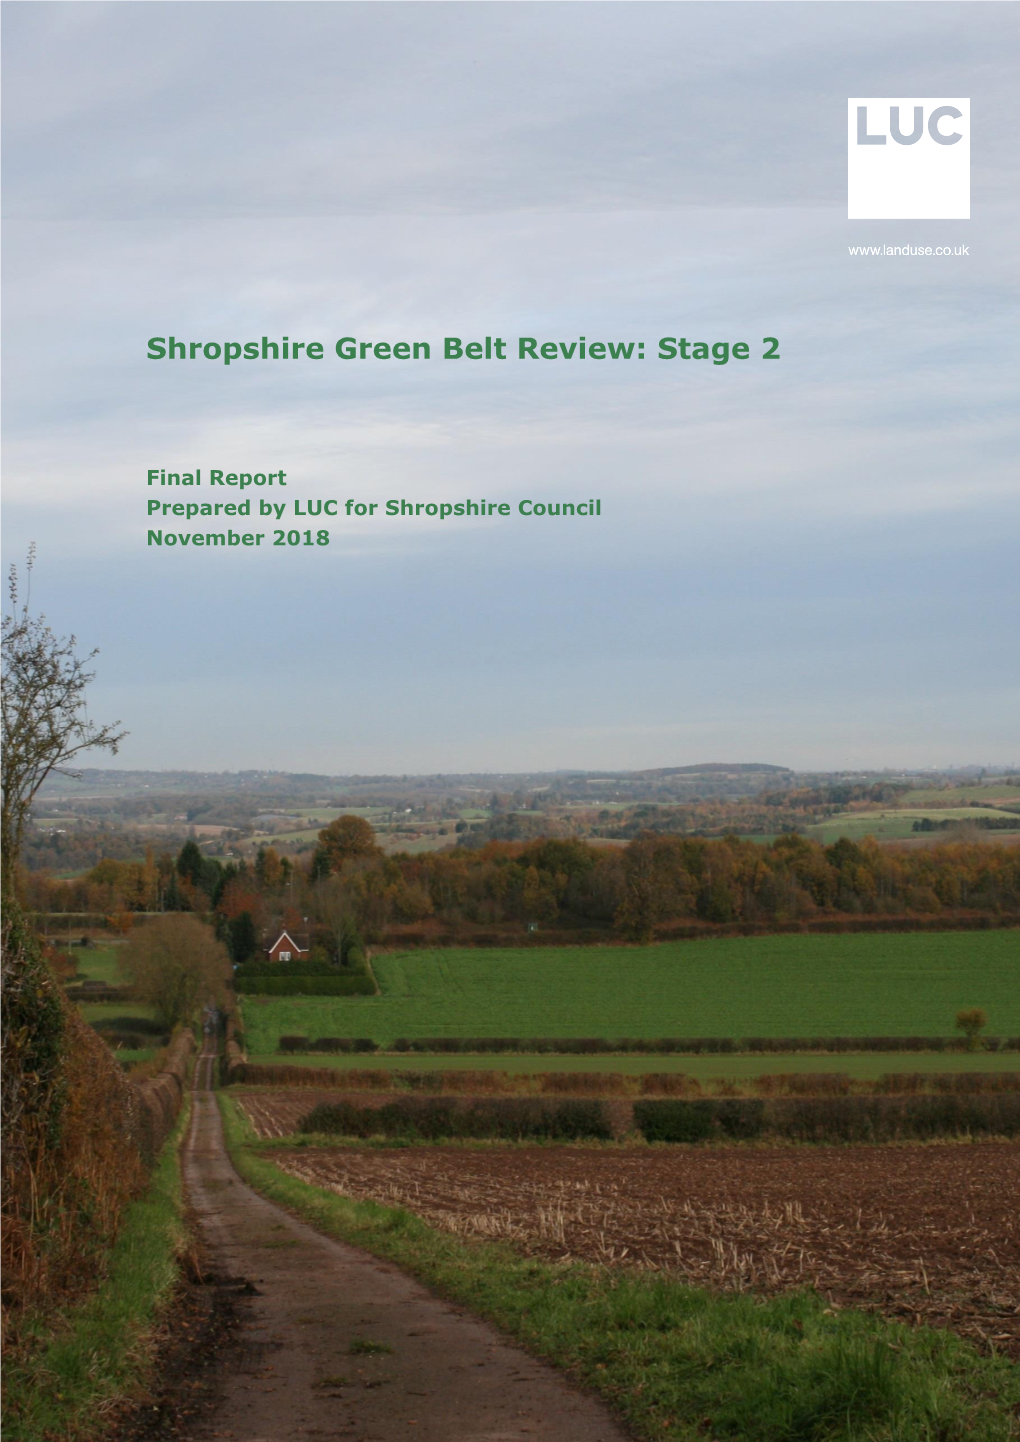 Shropshire Green Belt Review: Stage 2